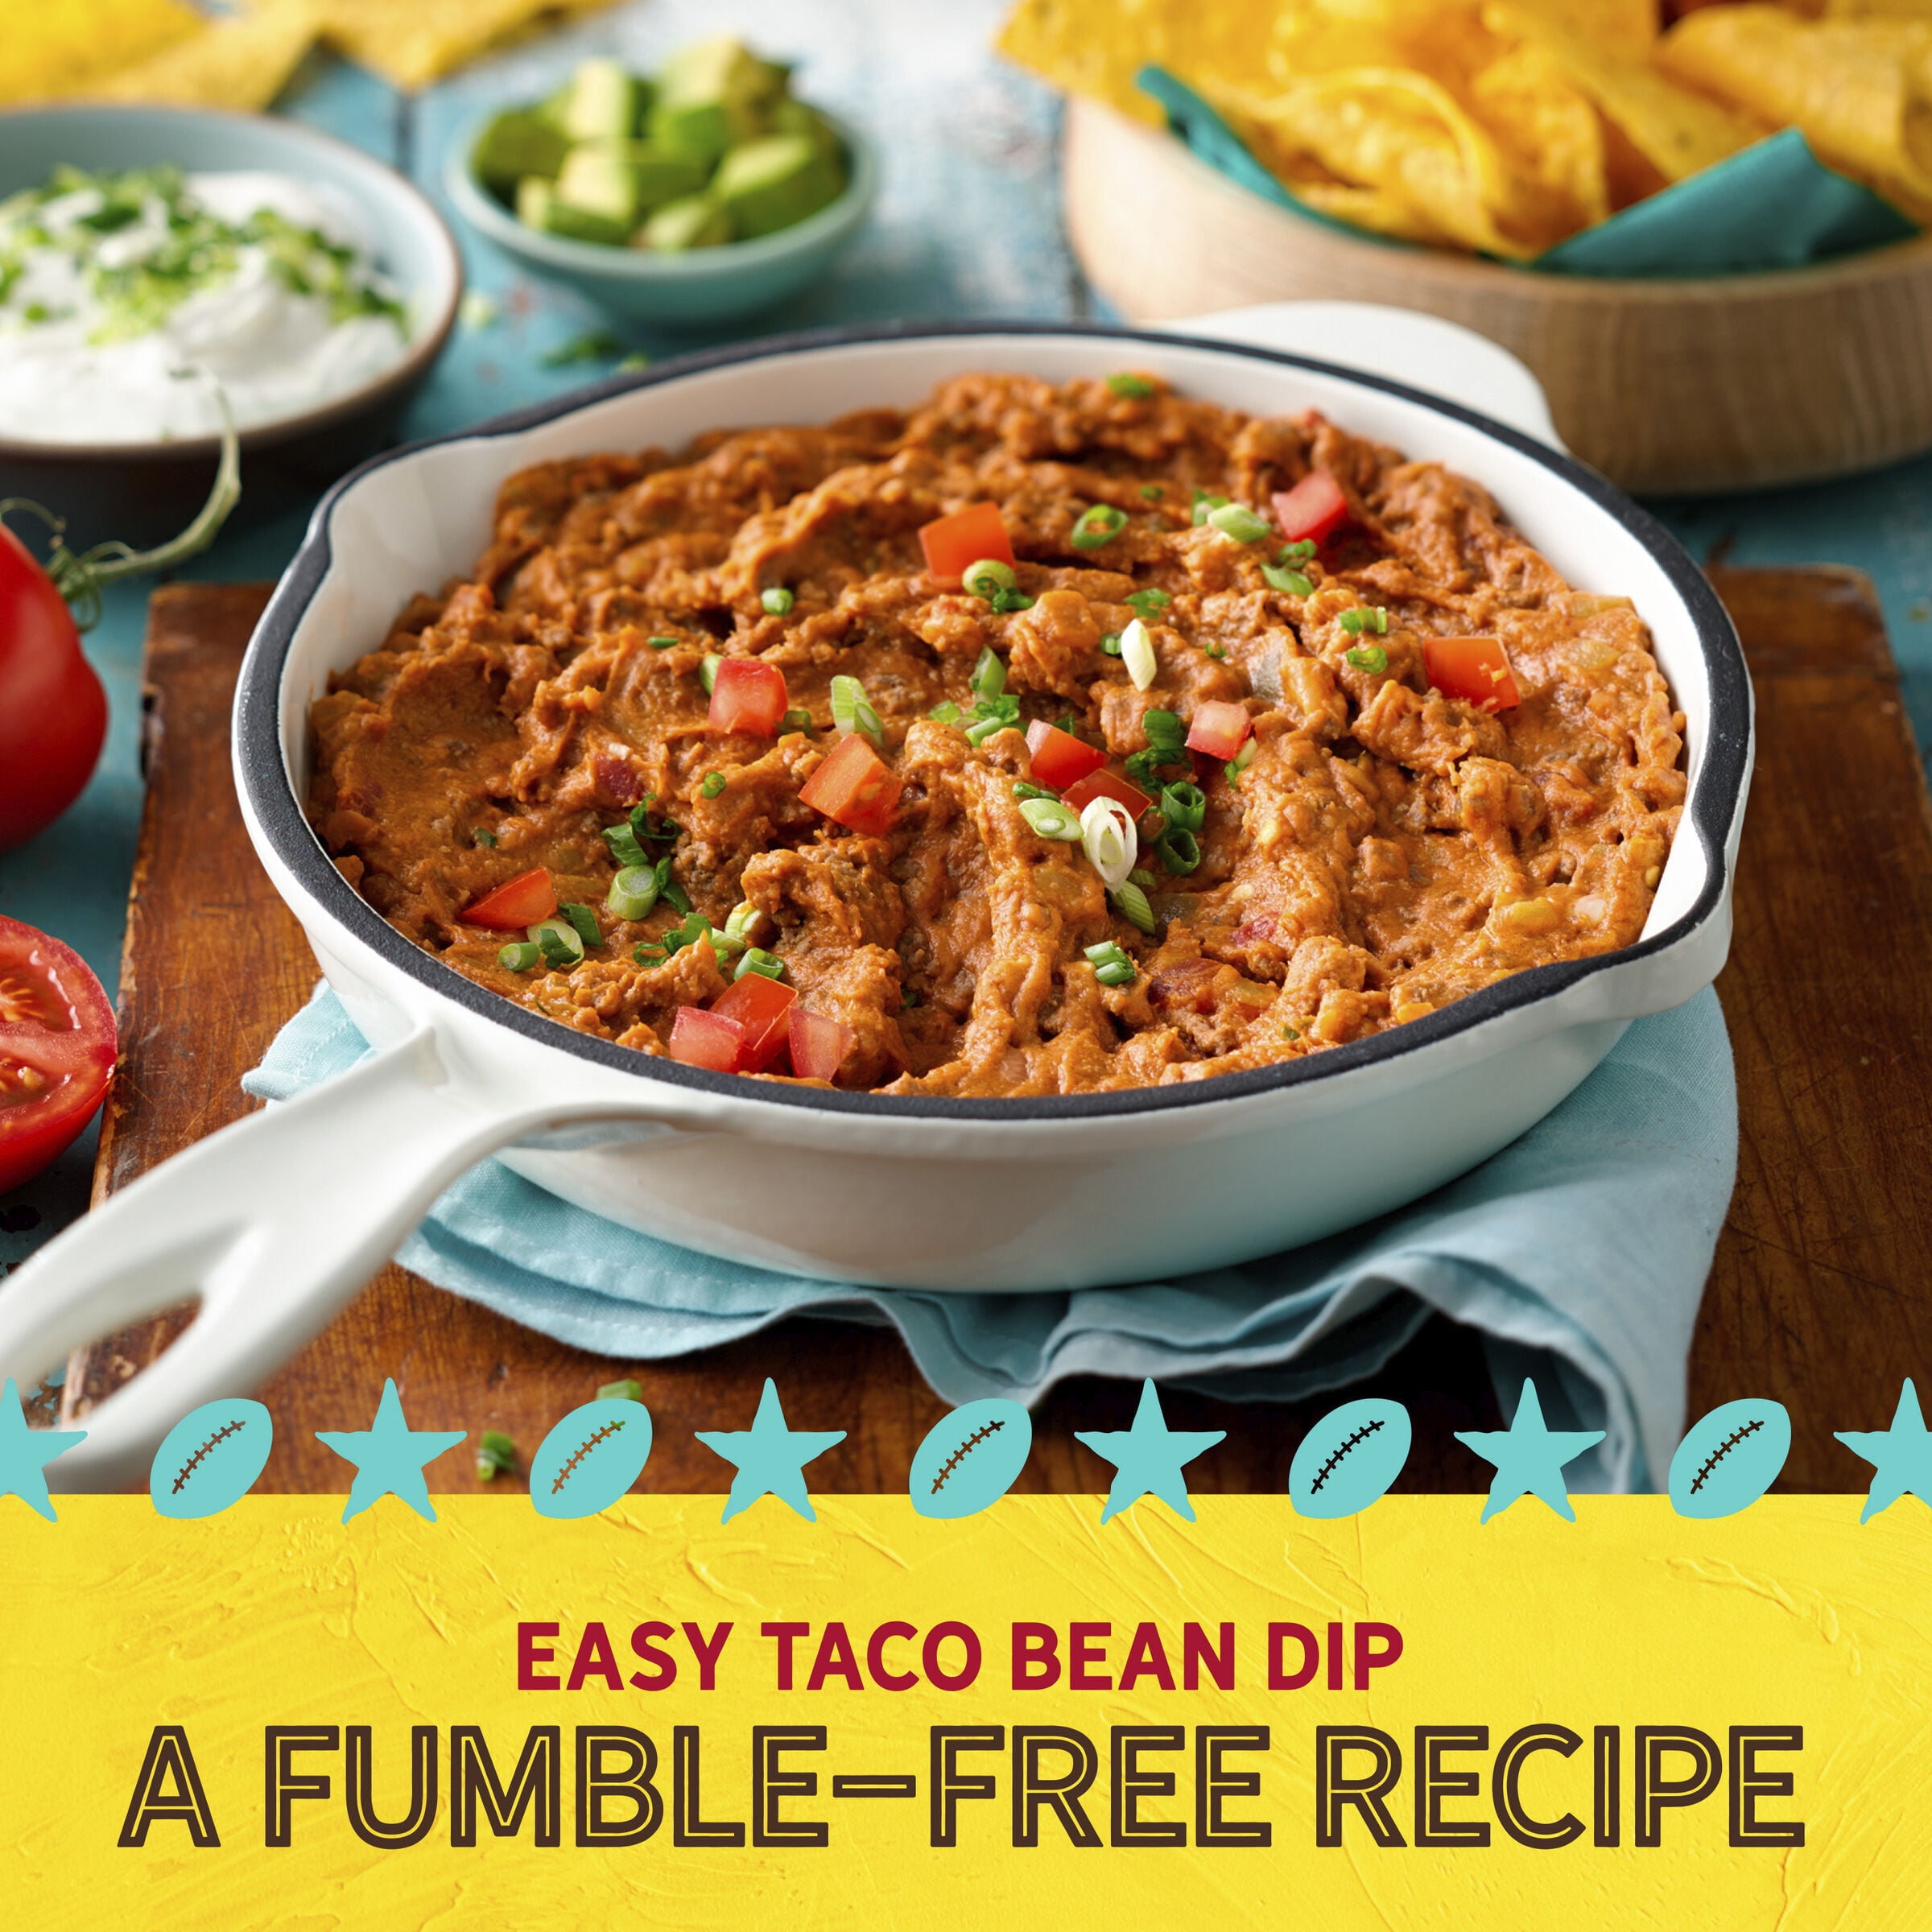 Old El Paso Traditional Canned Refried Beans, 16 oz. - Walmart.com